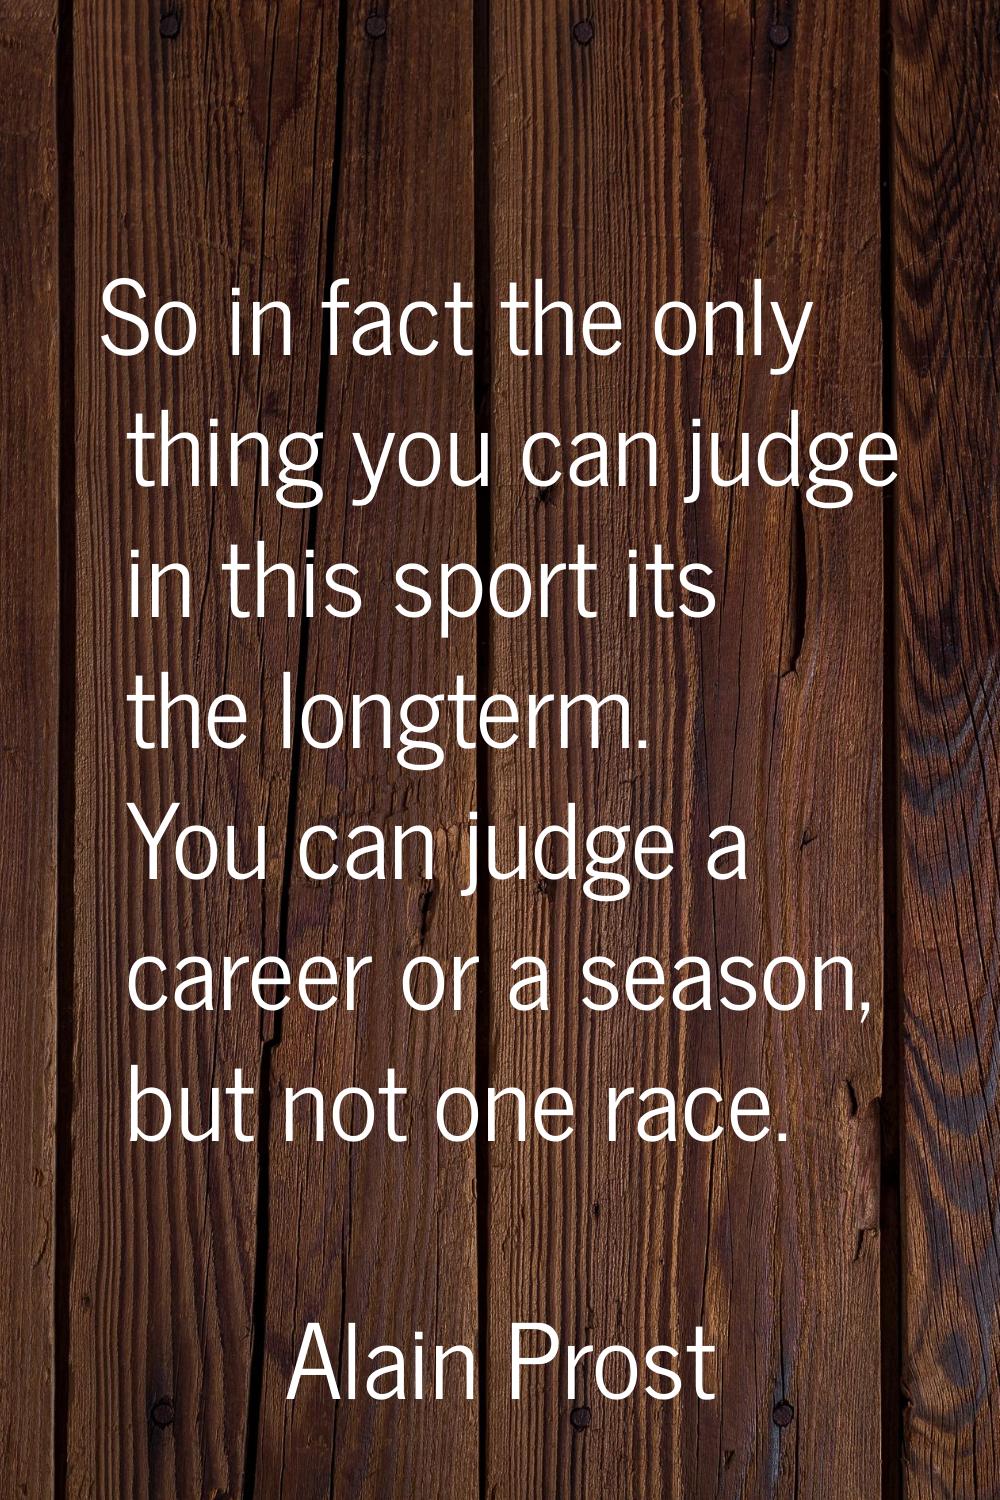 So in fact the only thing you can judge in this sport its the longterm. You can judge a career or a